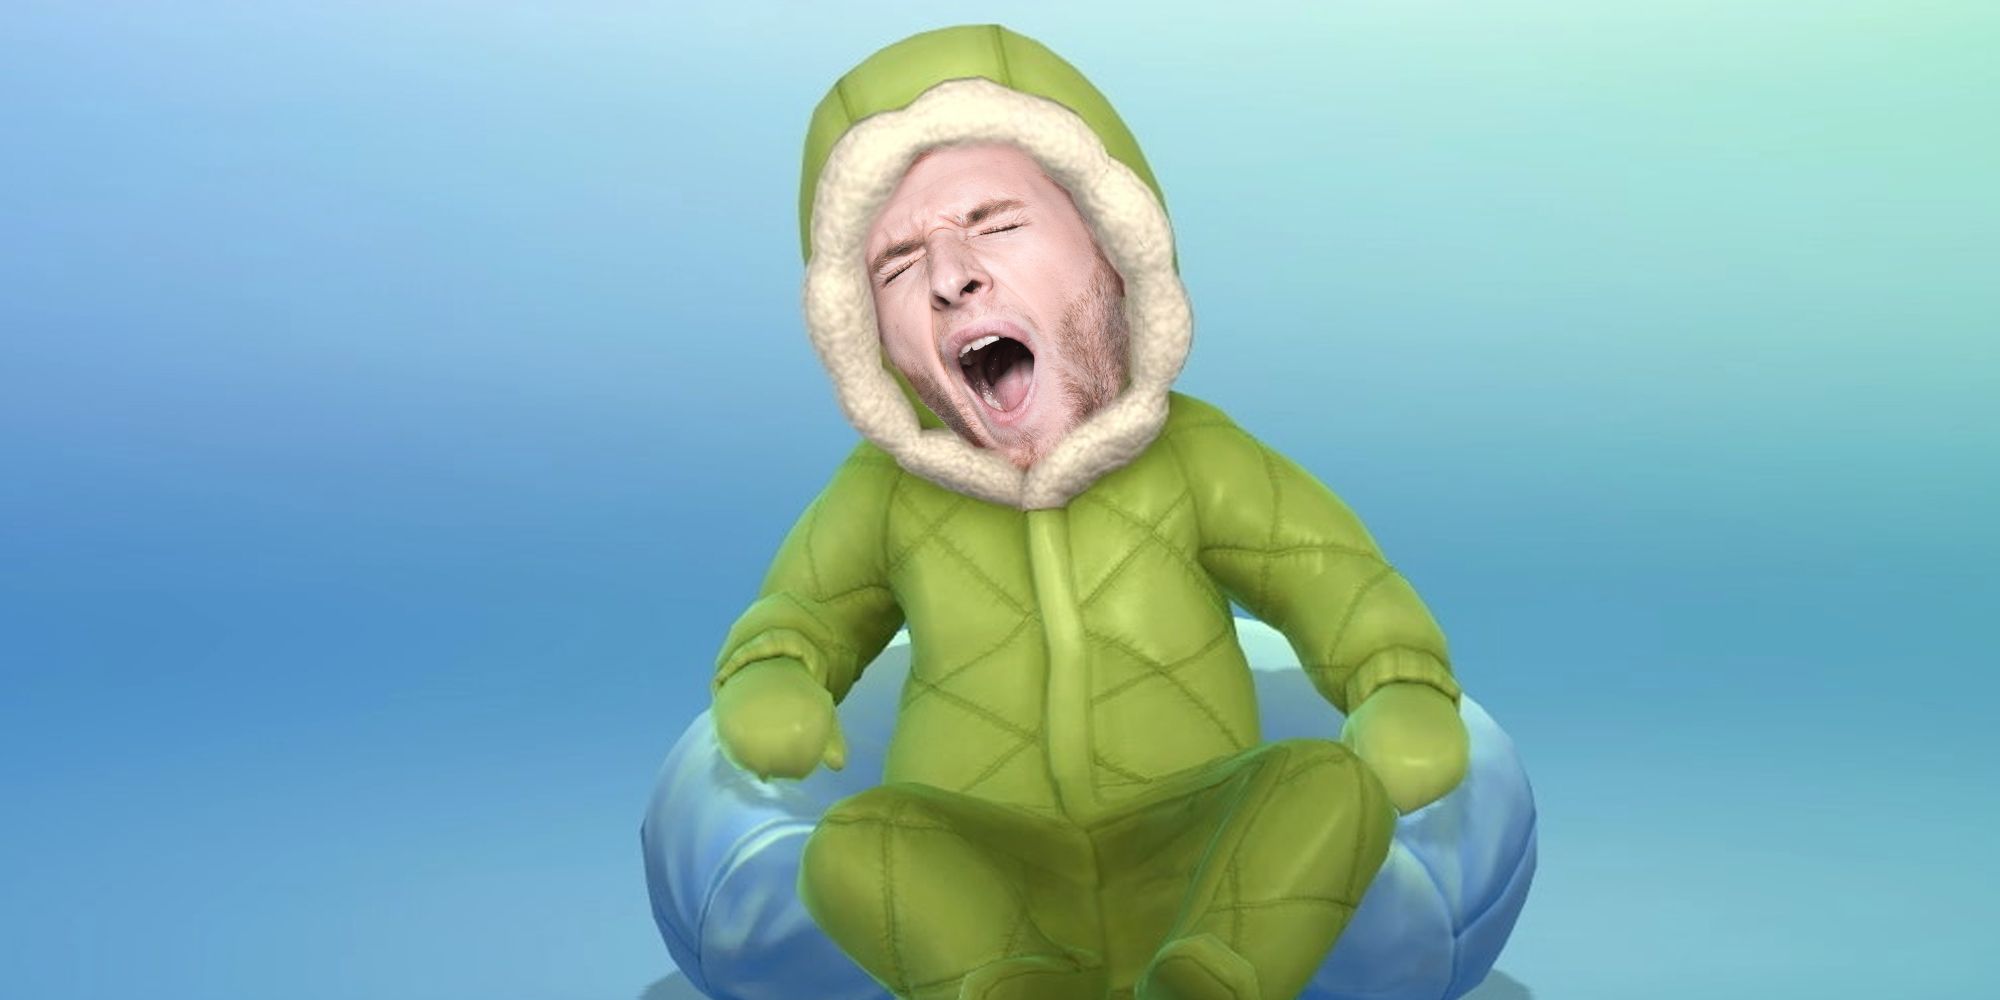 The Sims 4 Fans Say Infants Are “Boring” Without New DLC